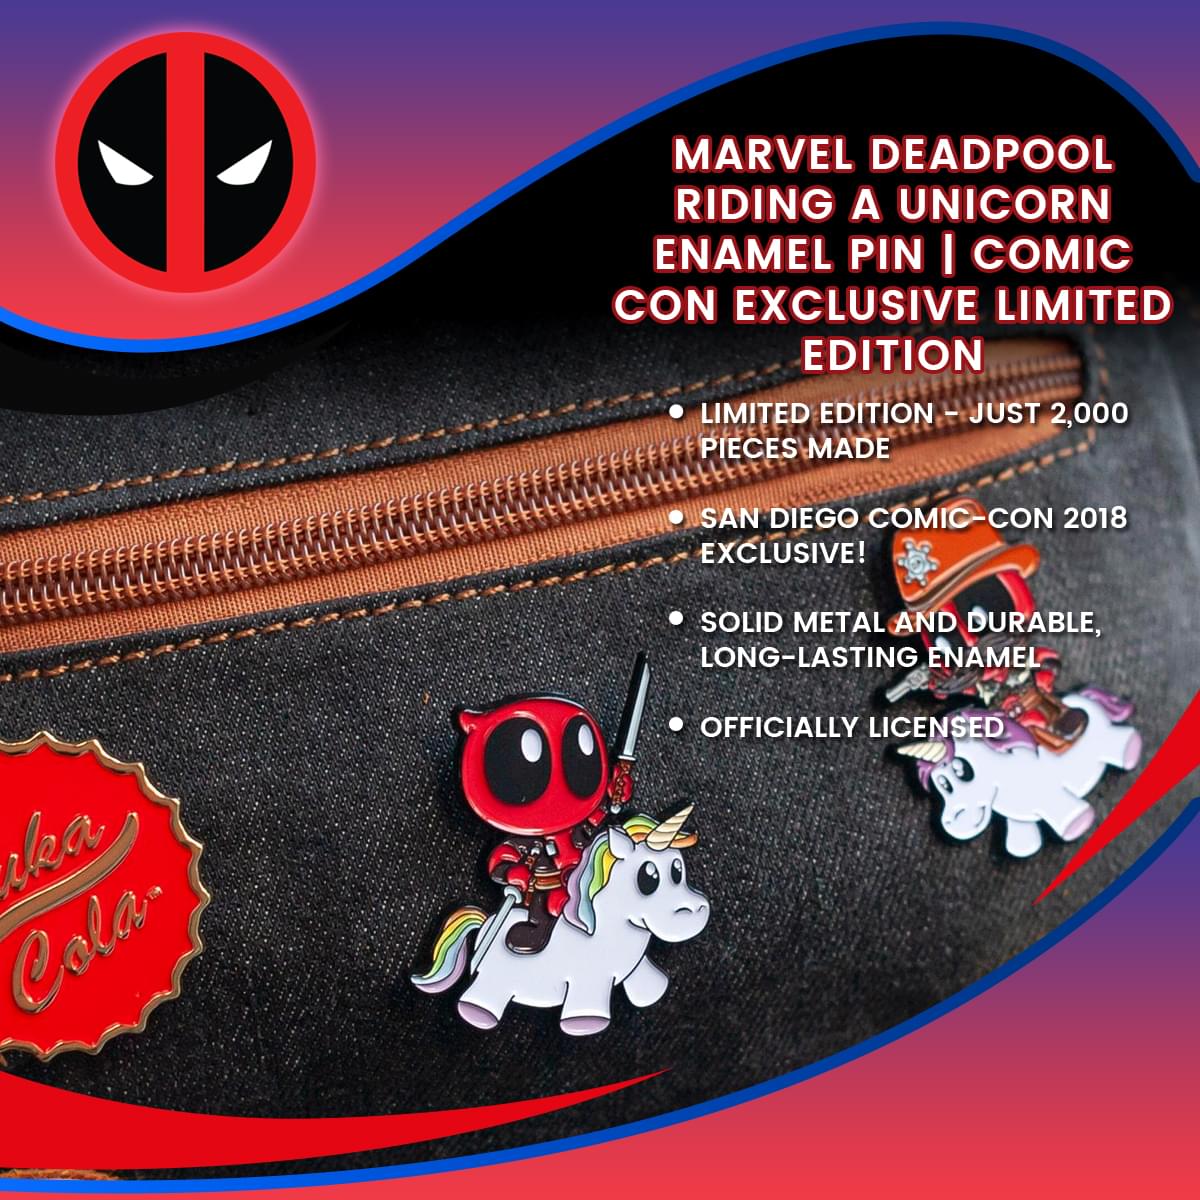 Marvel Deadpool Riding a Unicorn Enamel Pin | Comic Con Exclusive Limited Edition